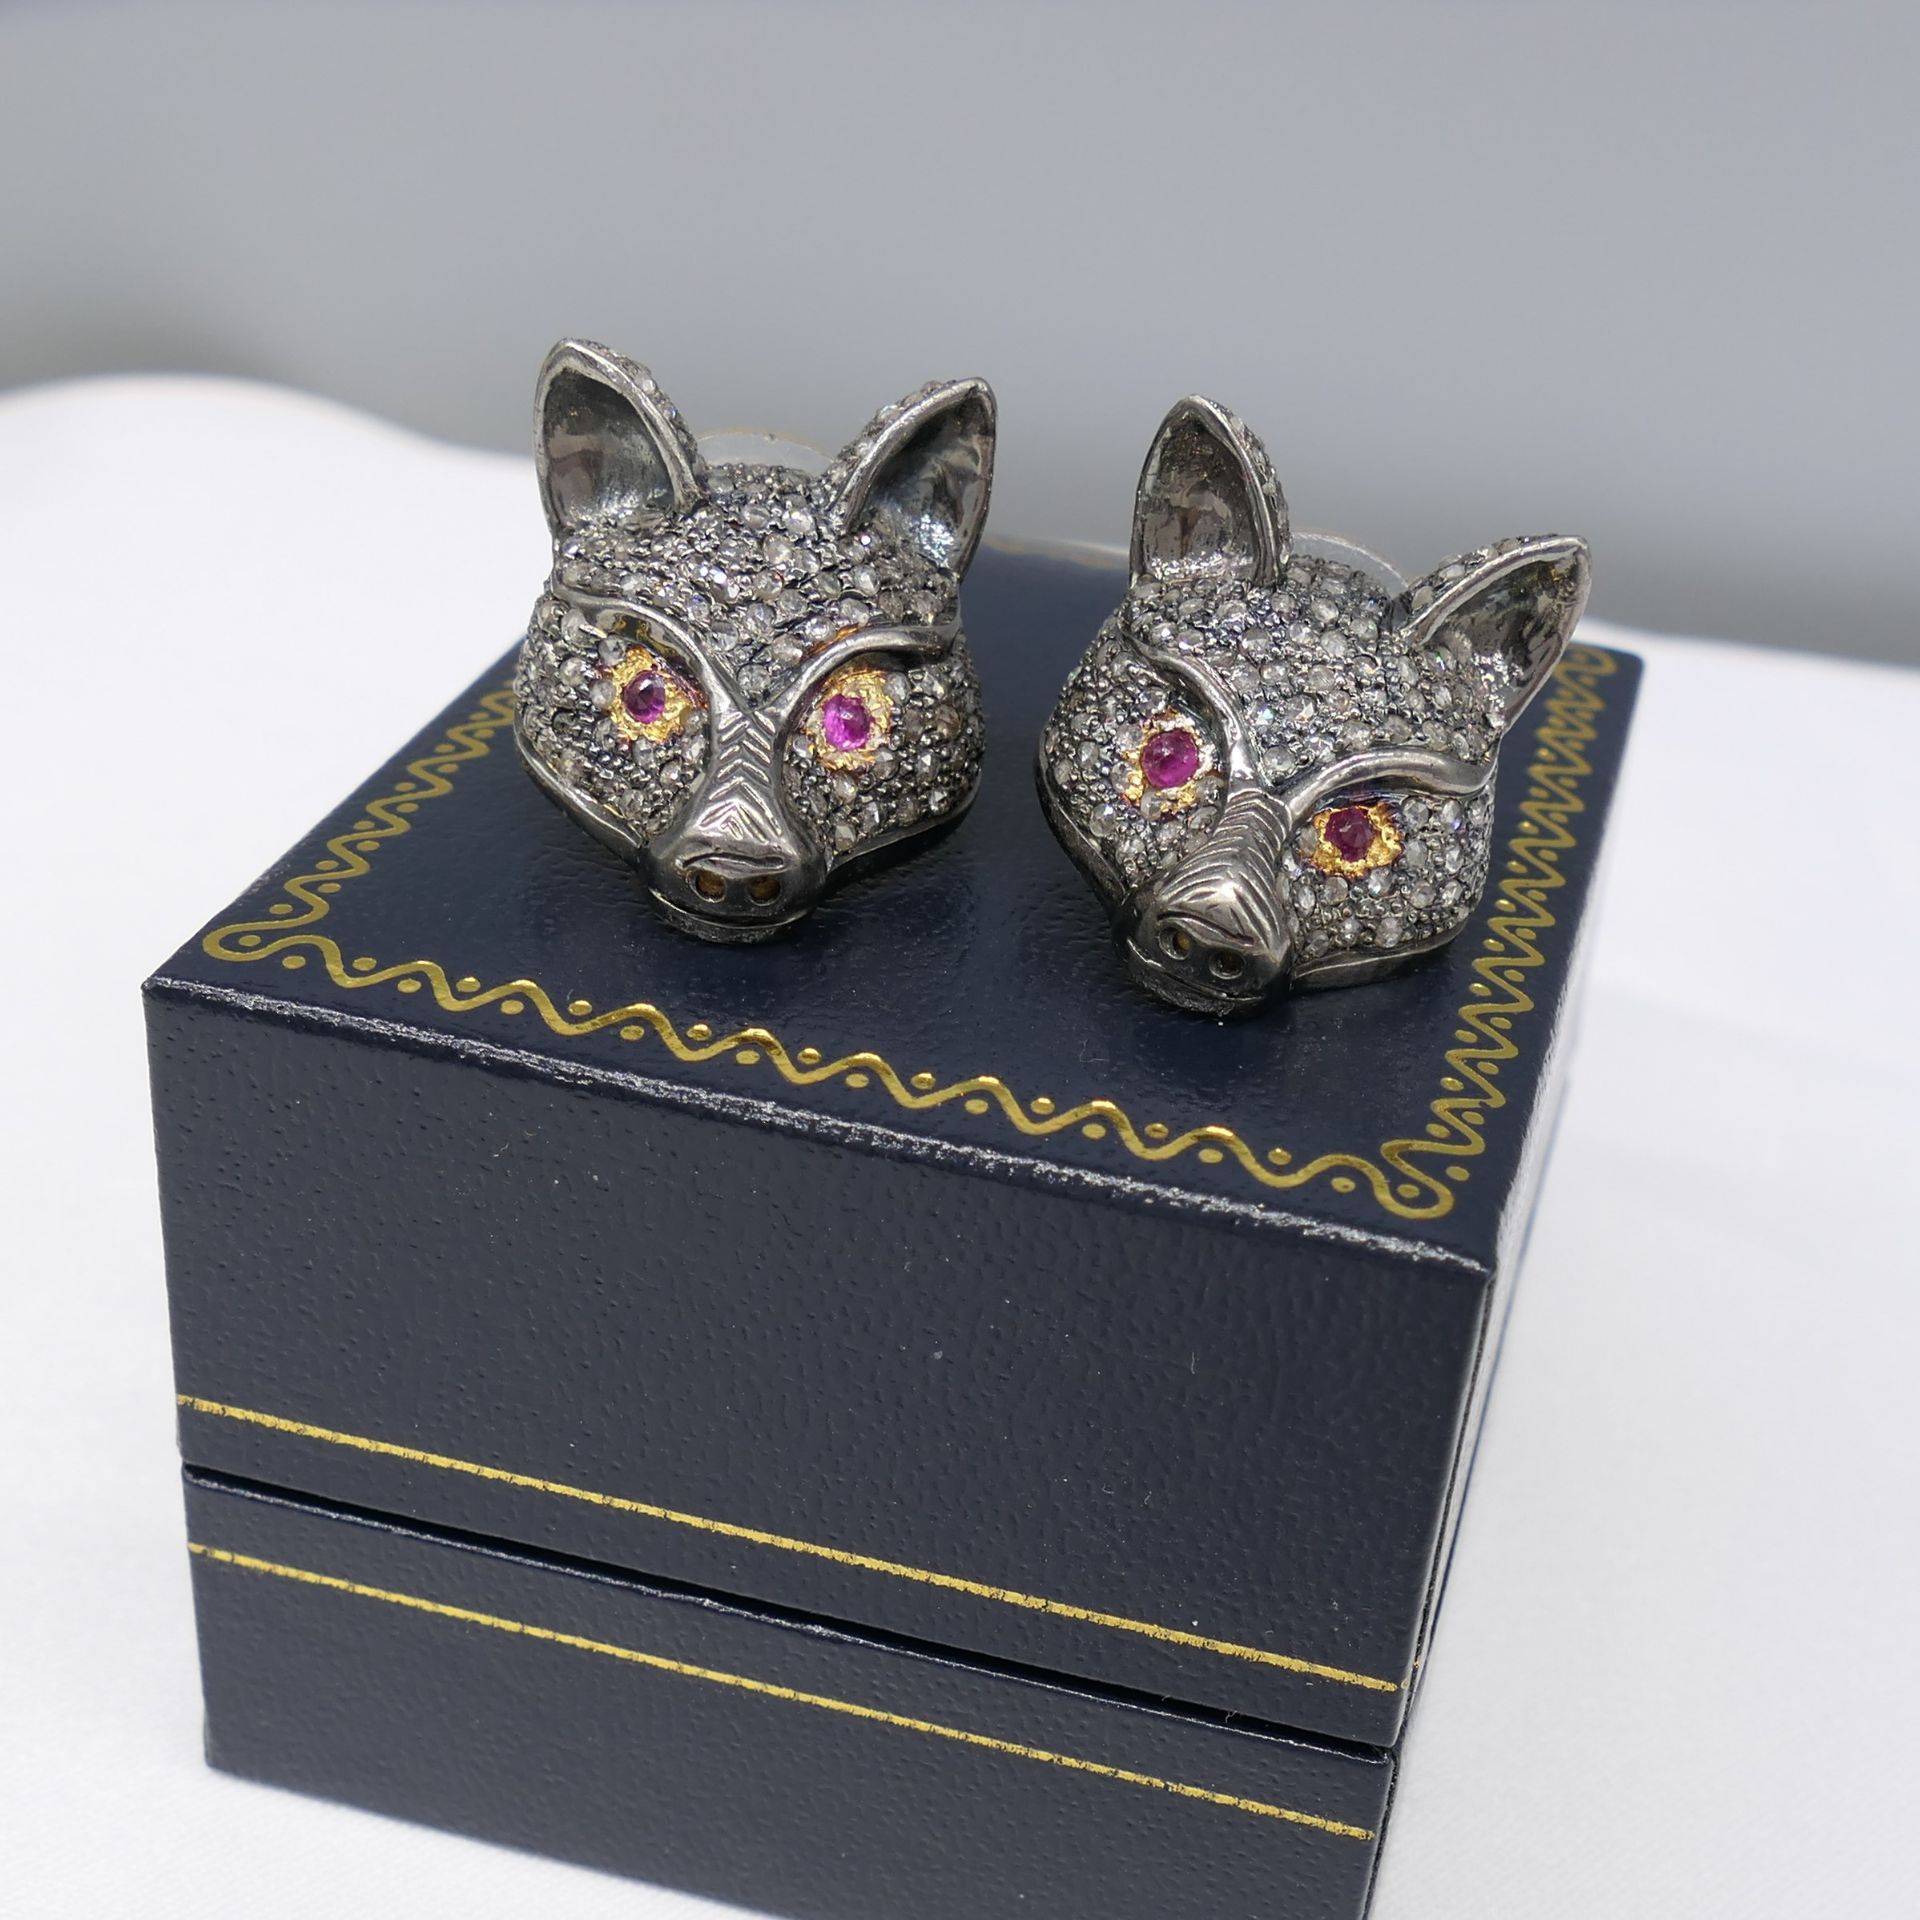 Pair of Unusual Diamond Encrusted Fox-Themed Earrings With Ruby-set Eyes, Boxed - Image 2 of 6